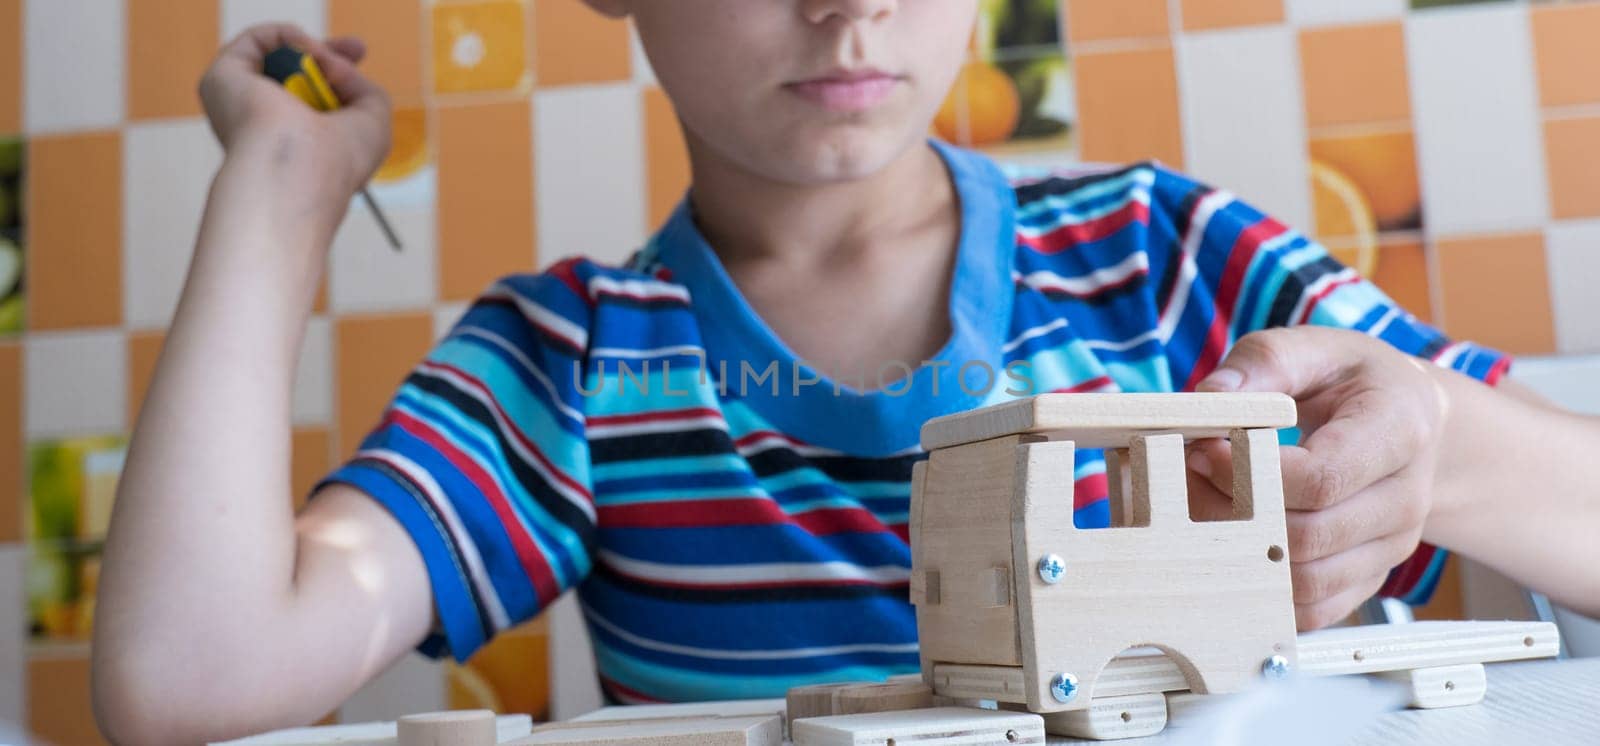 An 8-year-old boy assembles a wooden constructor by himself with a screwdriver. Close-up hands by Ekaterina34